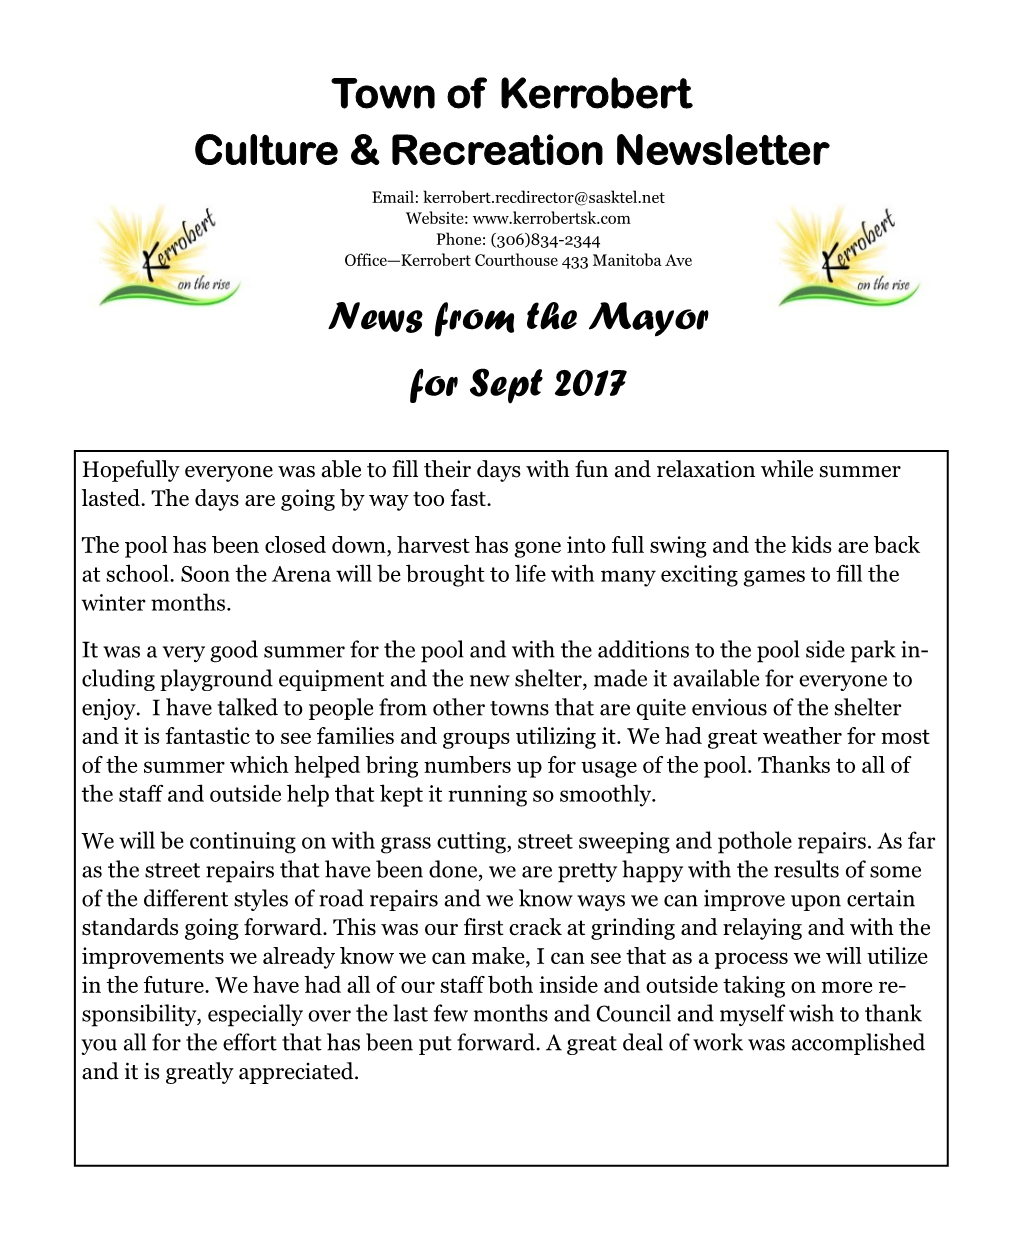 News from the Mayor for Sept 2017